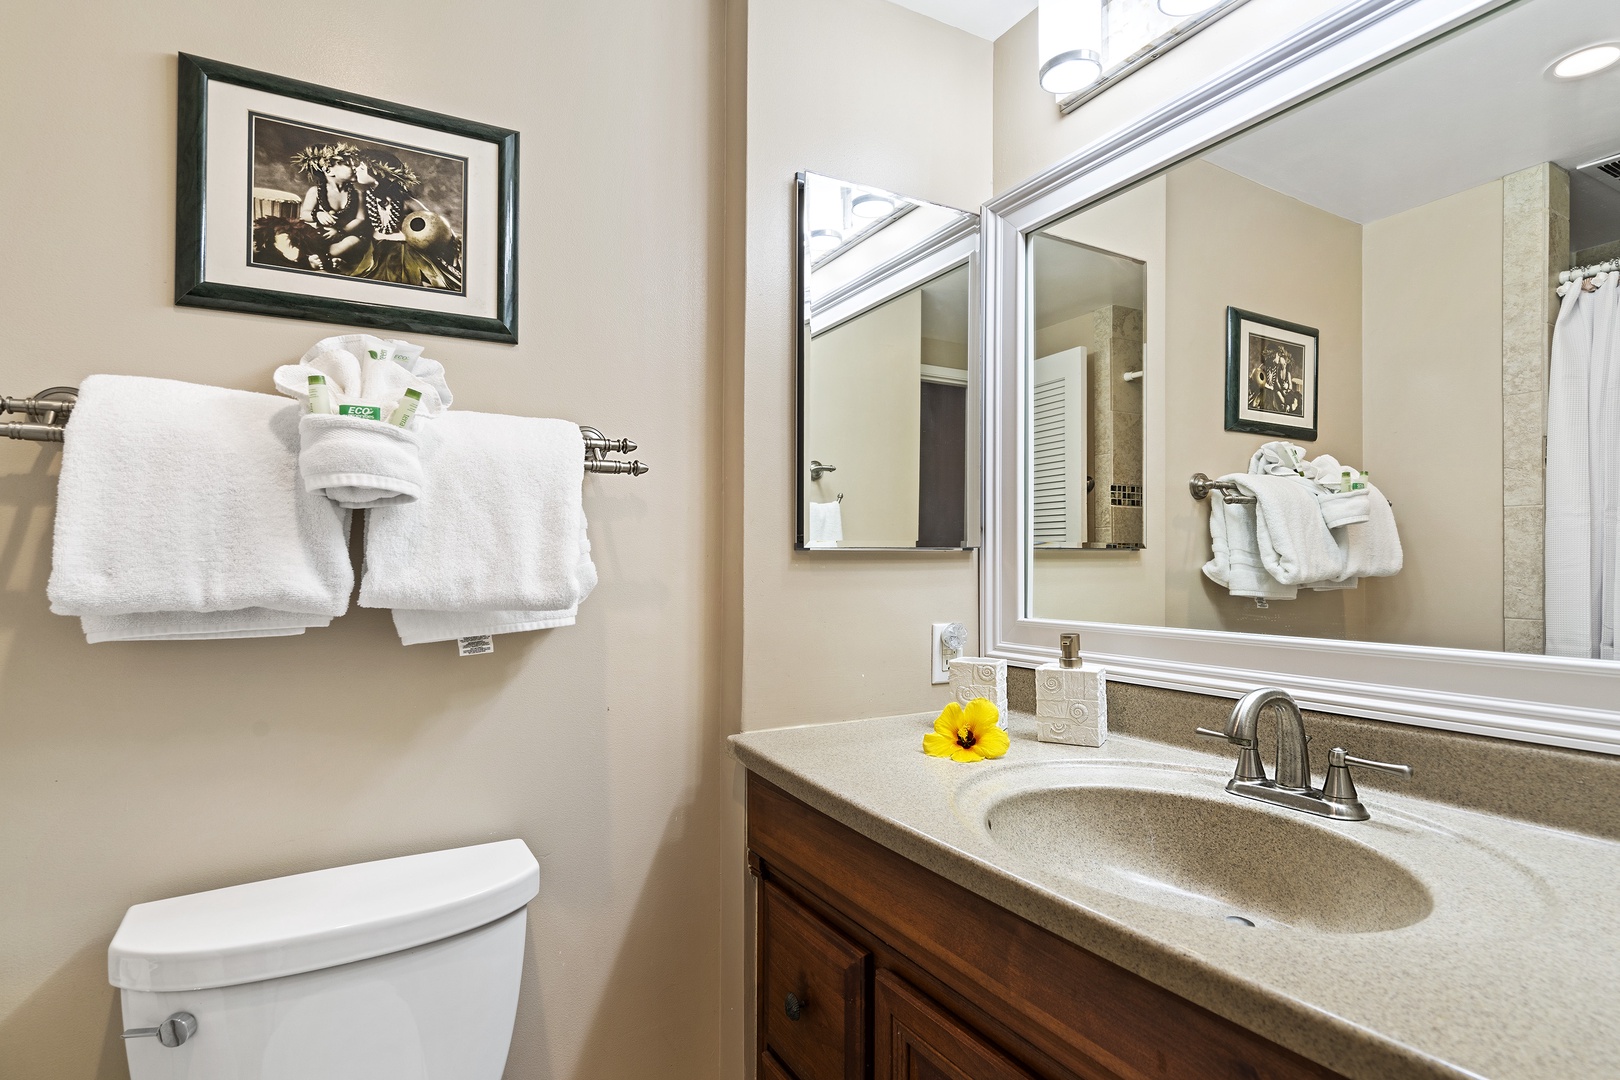 Kailua Kona Vacation Rentals, Sea Village 1105 - Guest bathroom across the hall from the guest bedroom